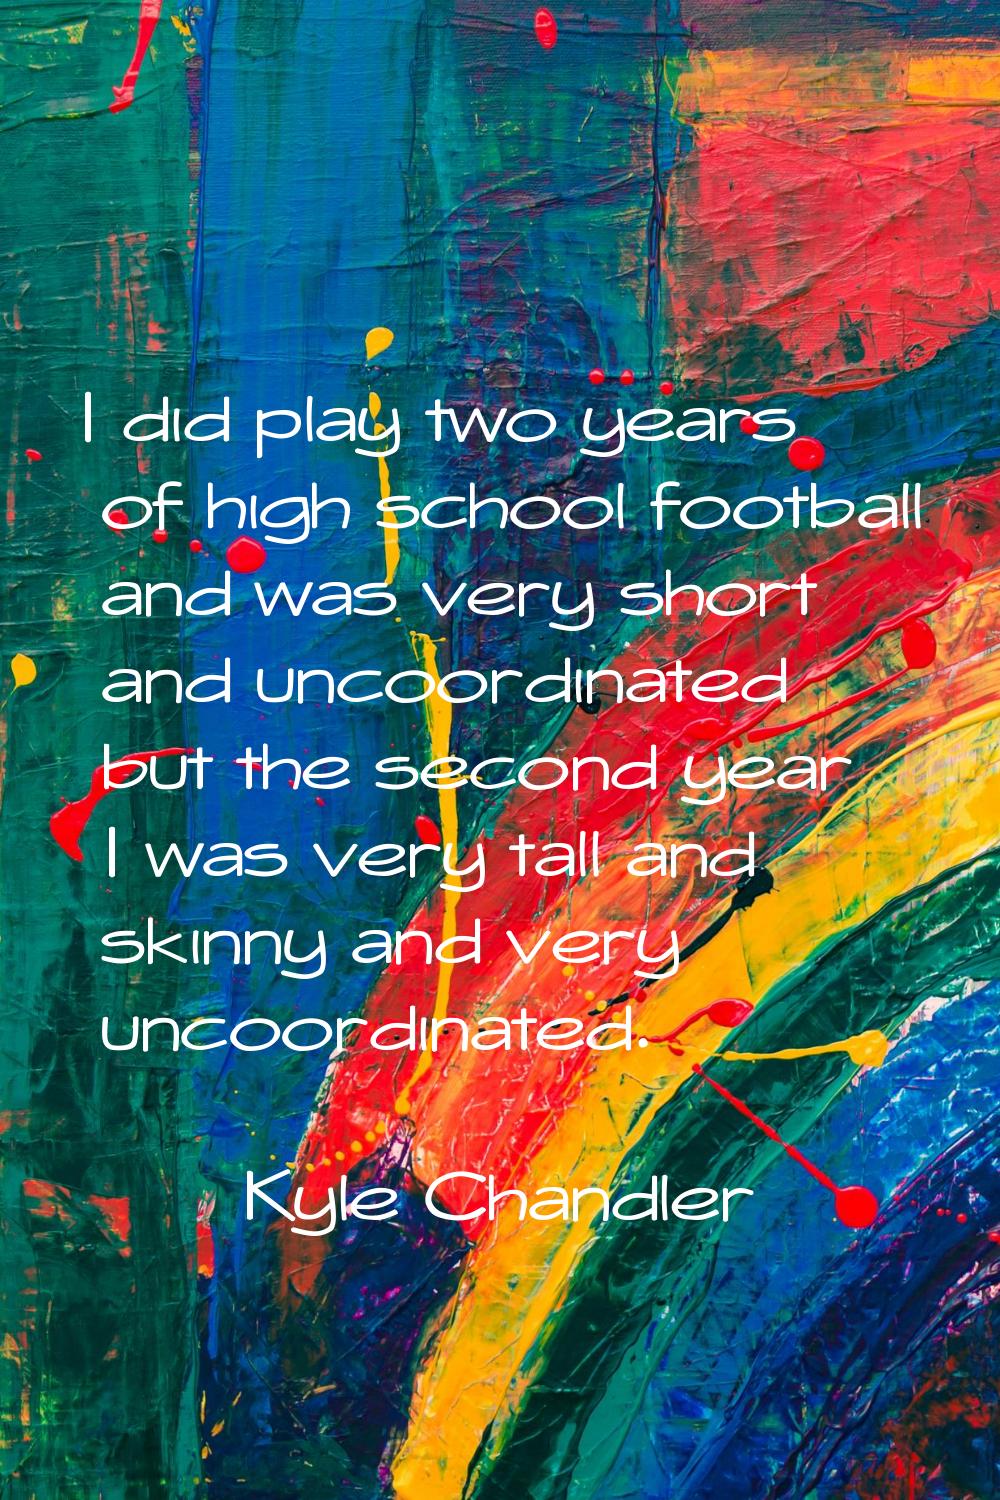 I did play two years of high school football and was very short and uncoordinated but the second ye